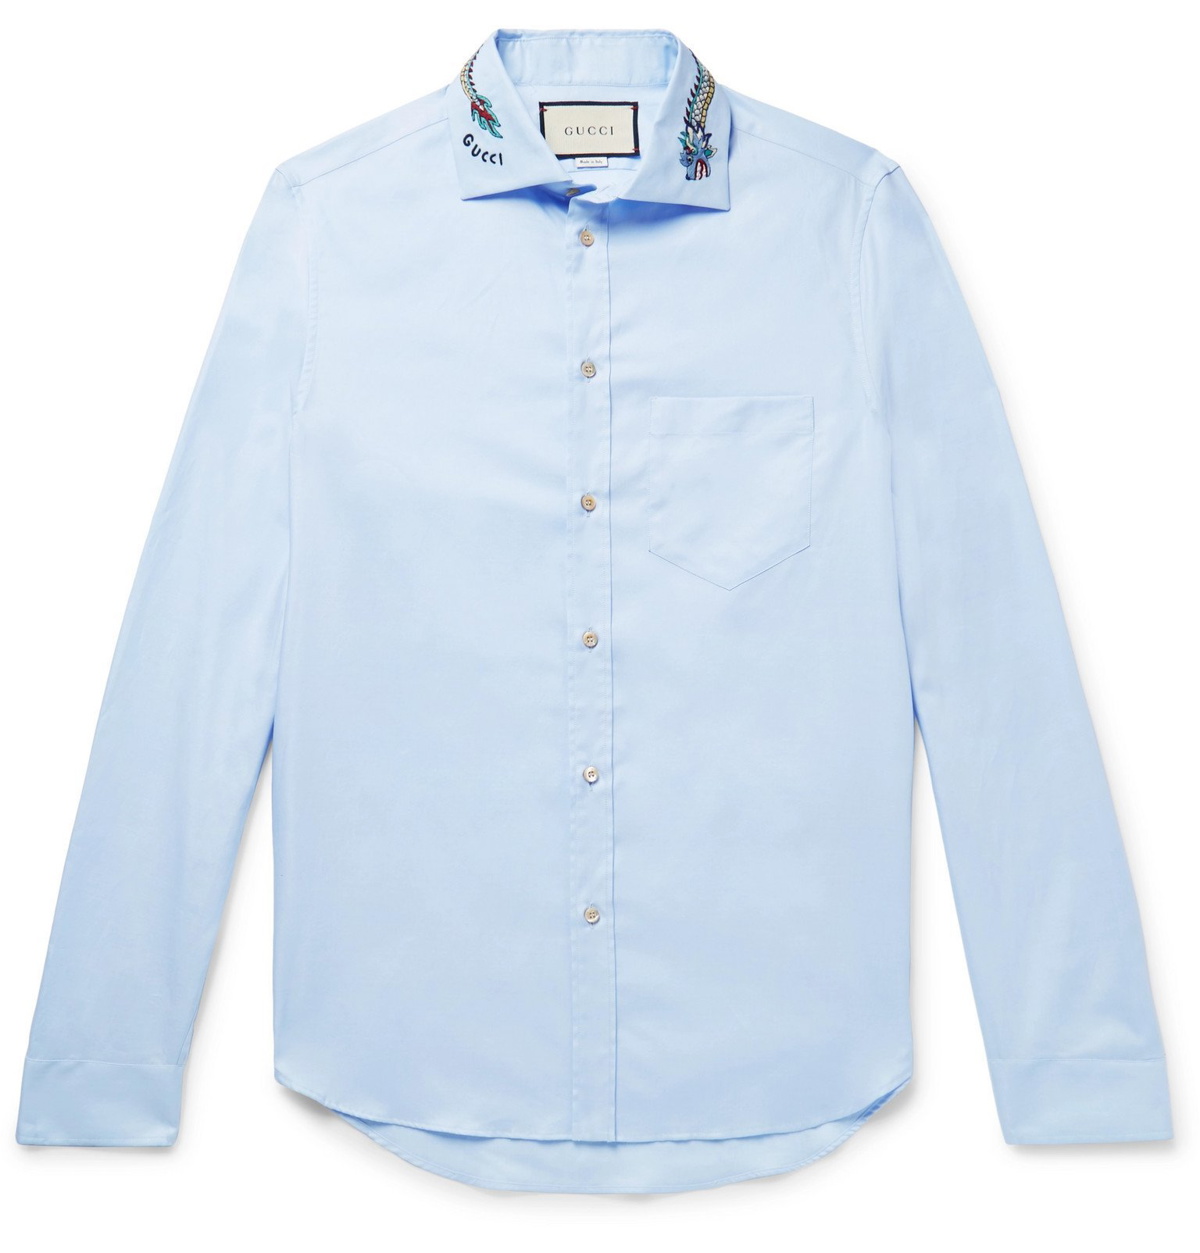 Gucci embroidered-logo Cotton Shirt - Blue